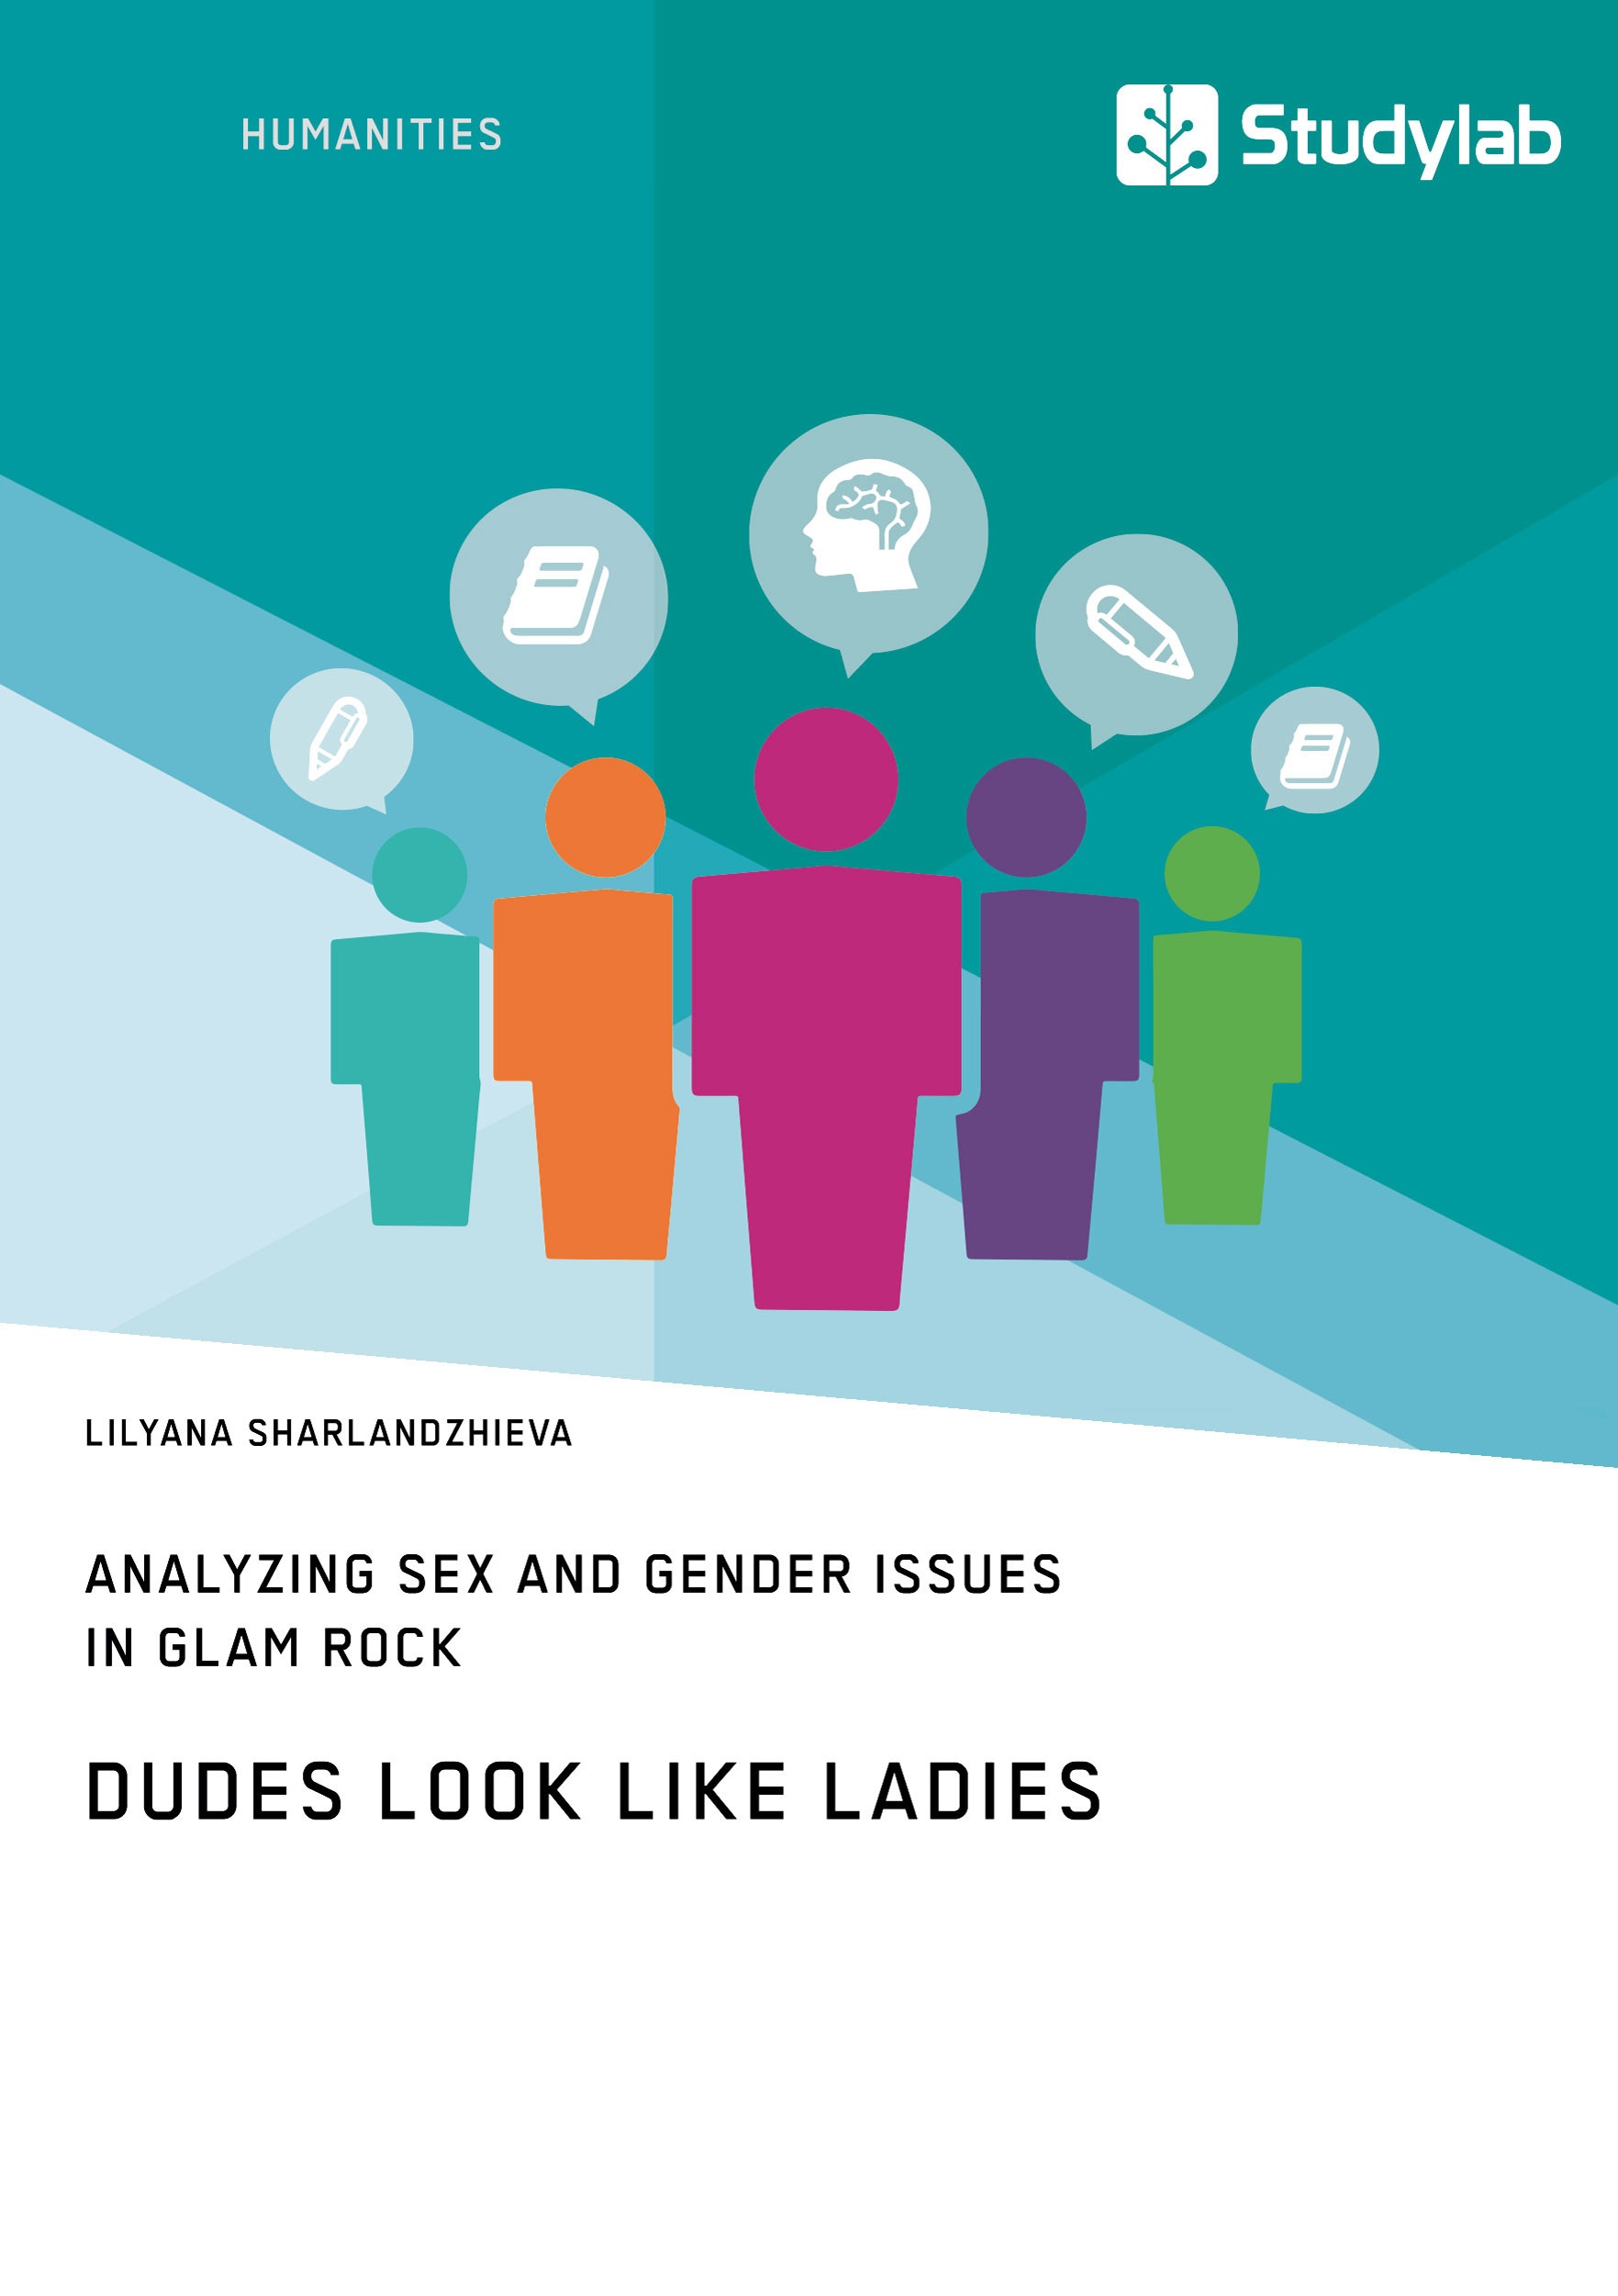 Title: Dudes Look like Ladies. Analyzing Sex and Gender Issues in Glam Rock